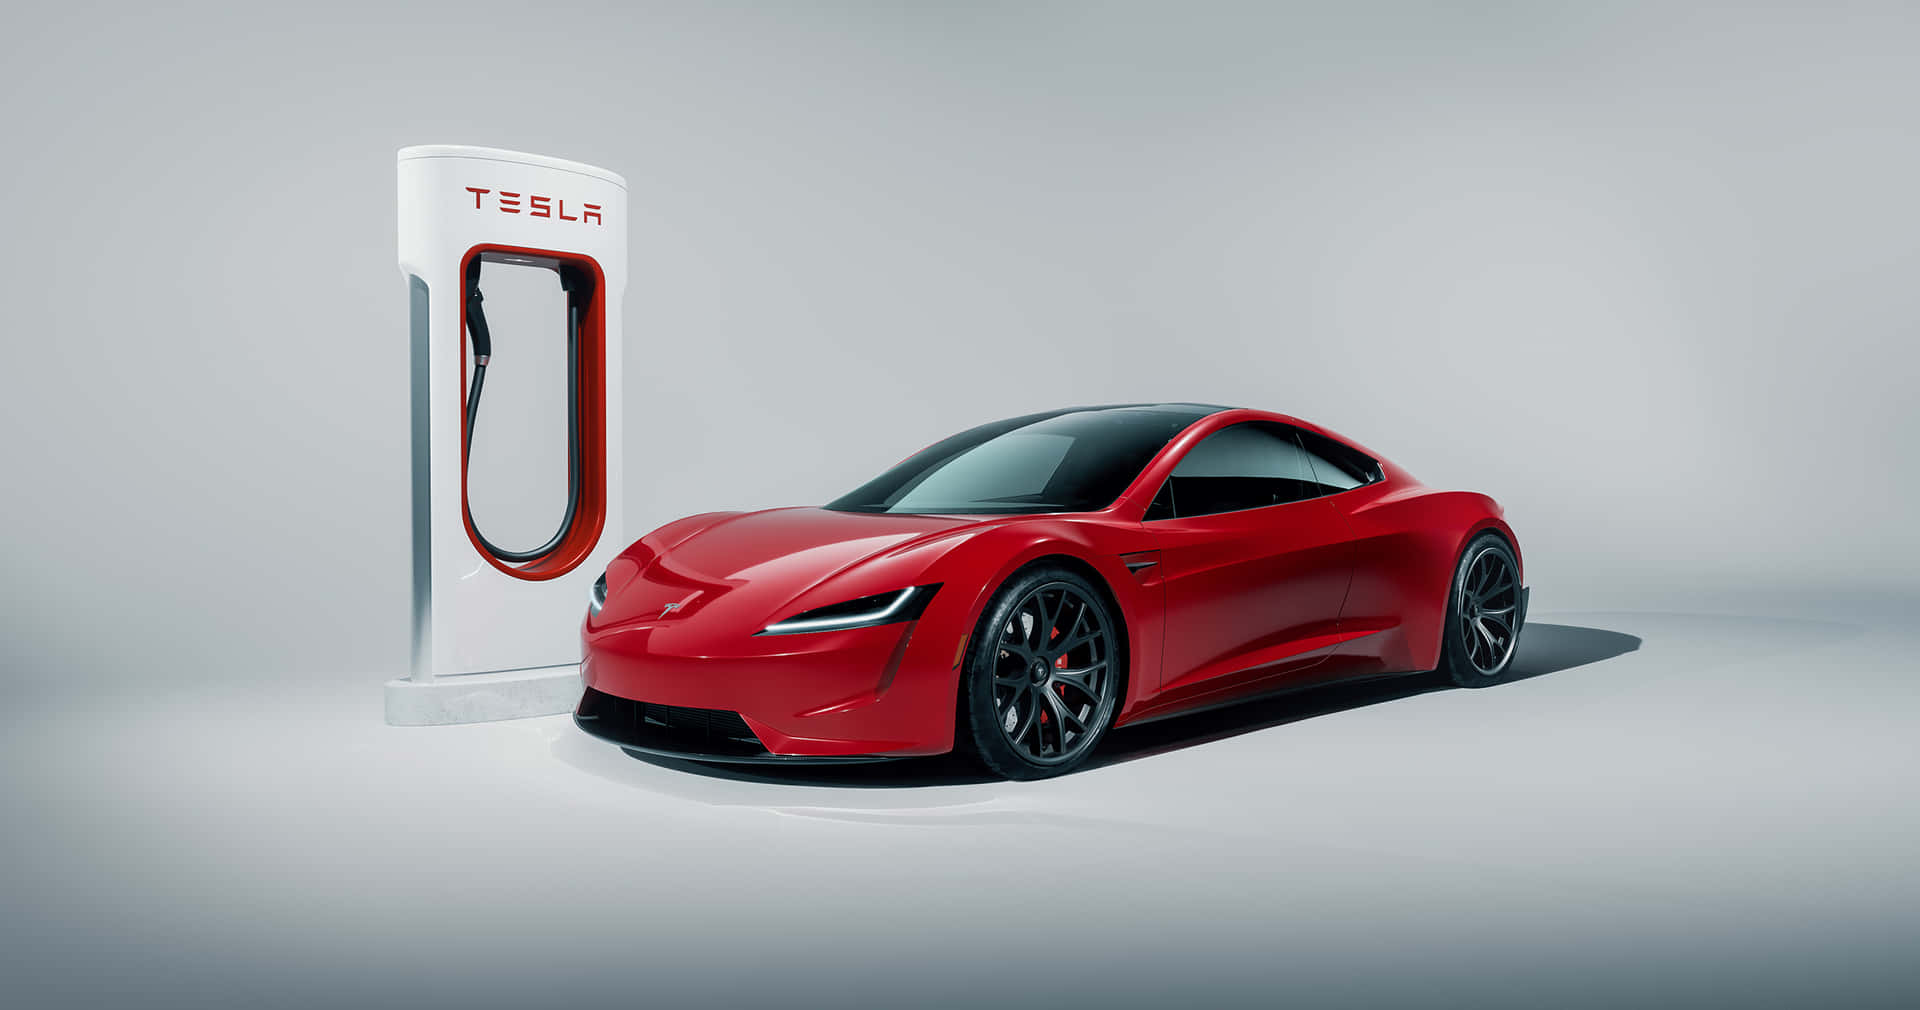 Showcase Of Sophistication And Power - The Tesla Roadster Background